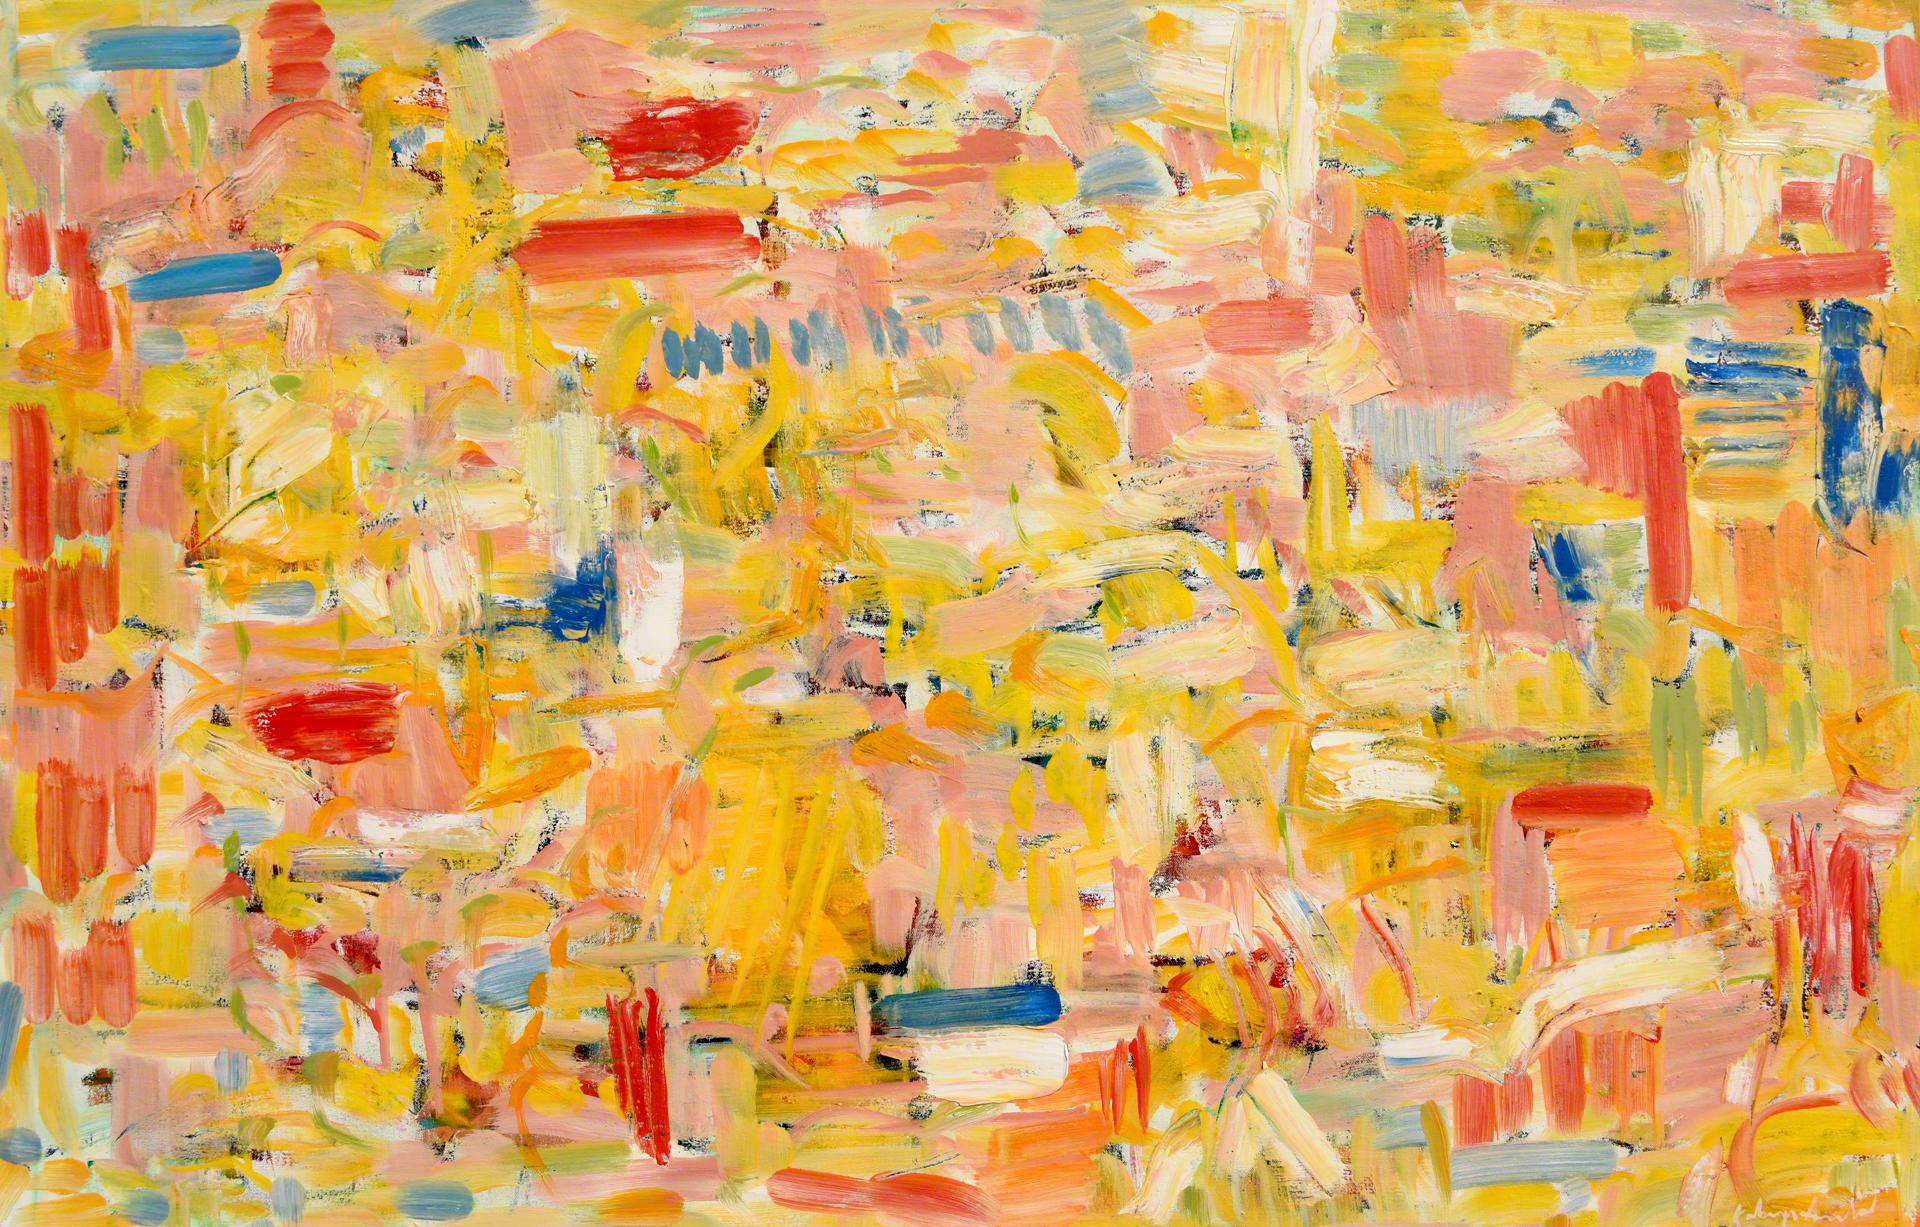 Kathryn Arnold Abstract Painting - "After Urbana #3", Contemporary, Abstract, Oil, Painting, Canvas